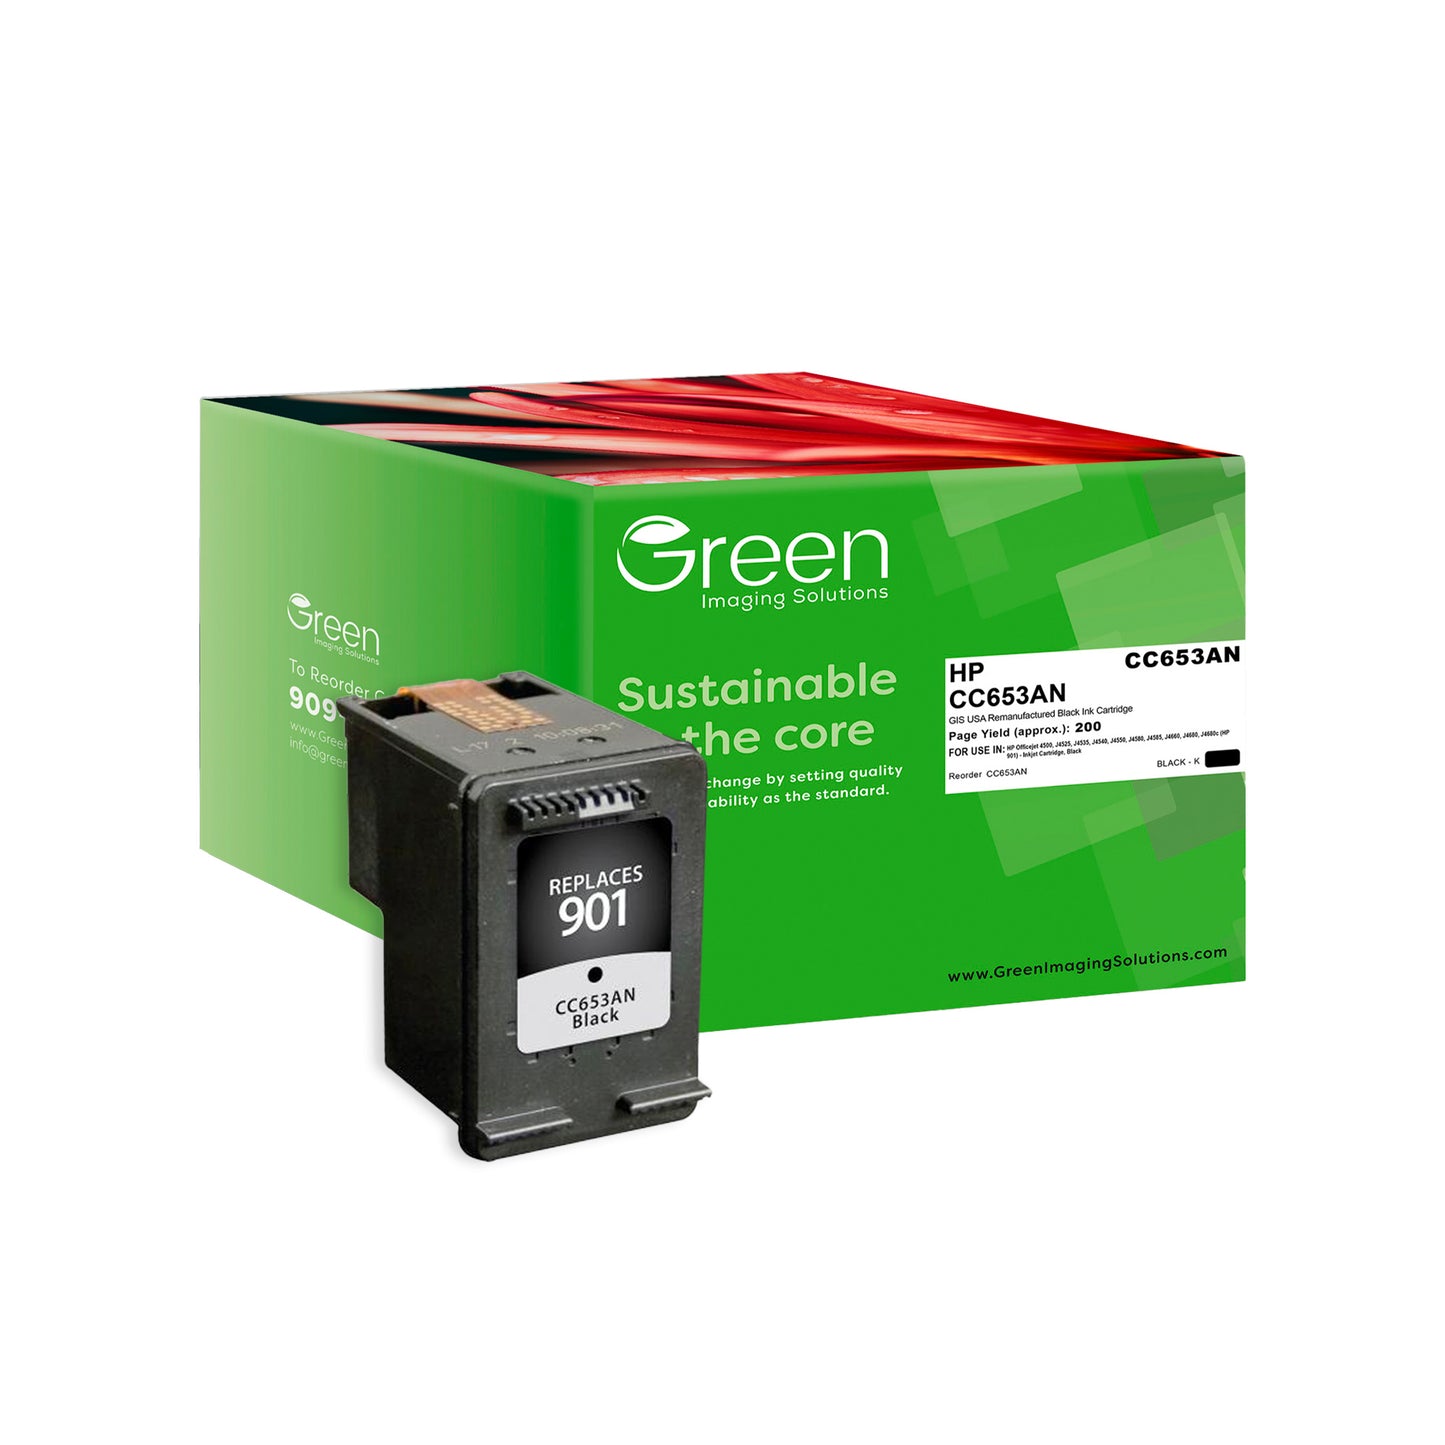 Green Imaging Solutions USA Remanufactured Black Ink Cartridge for HP 901 (CC653AN)